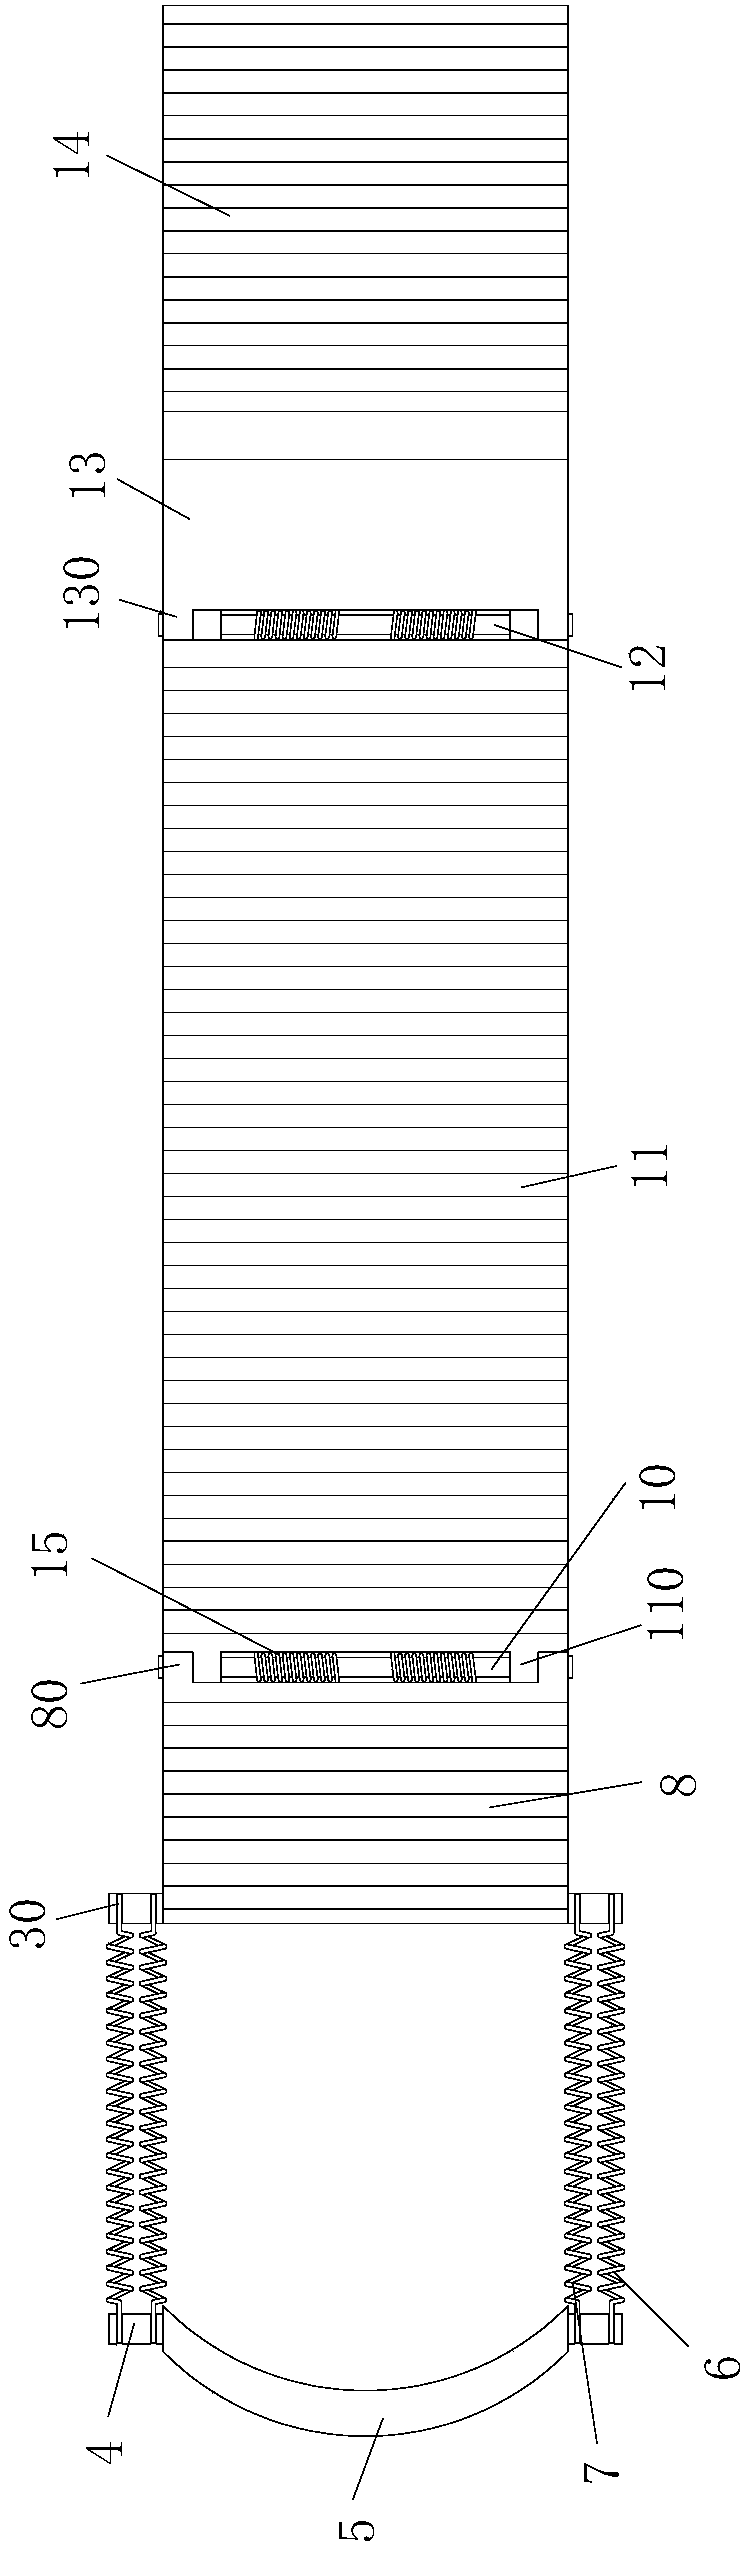 Automobile trapping lifting apparatus